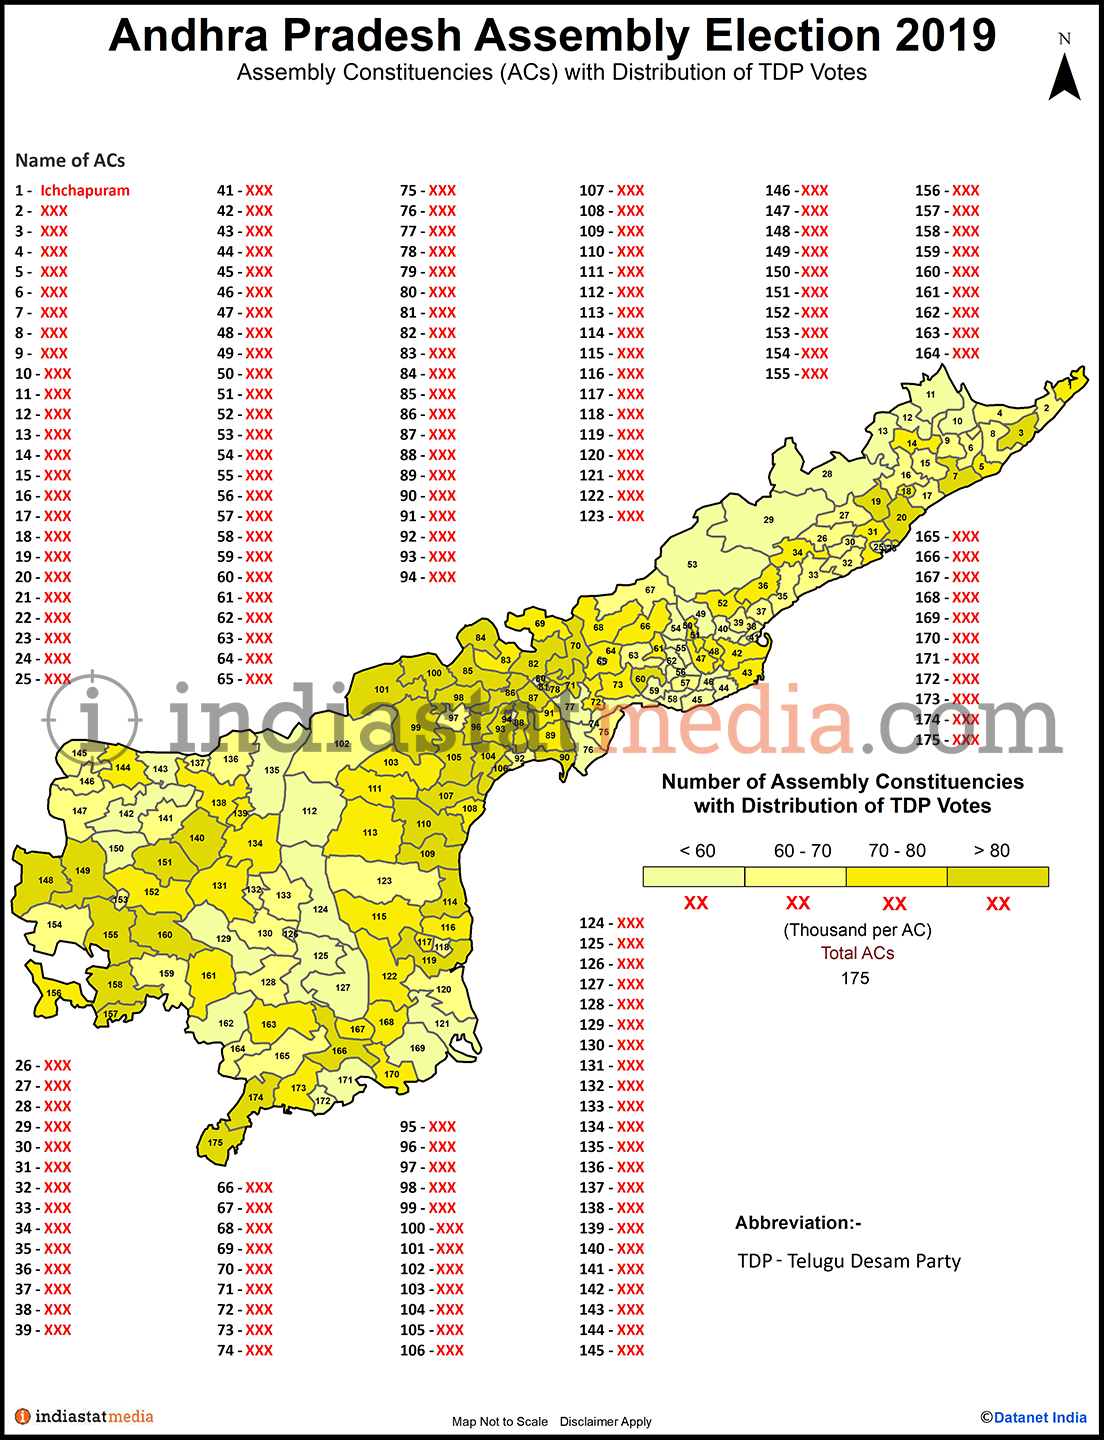 Distribution of TDP Votes by Constituencies in Andhra Pradesh (Assembly Election - 2019)